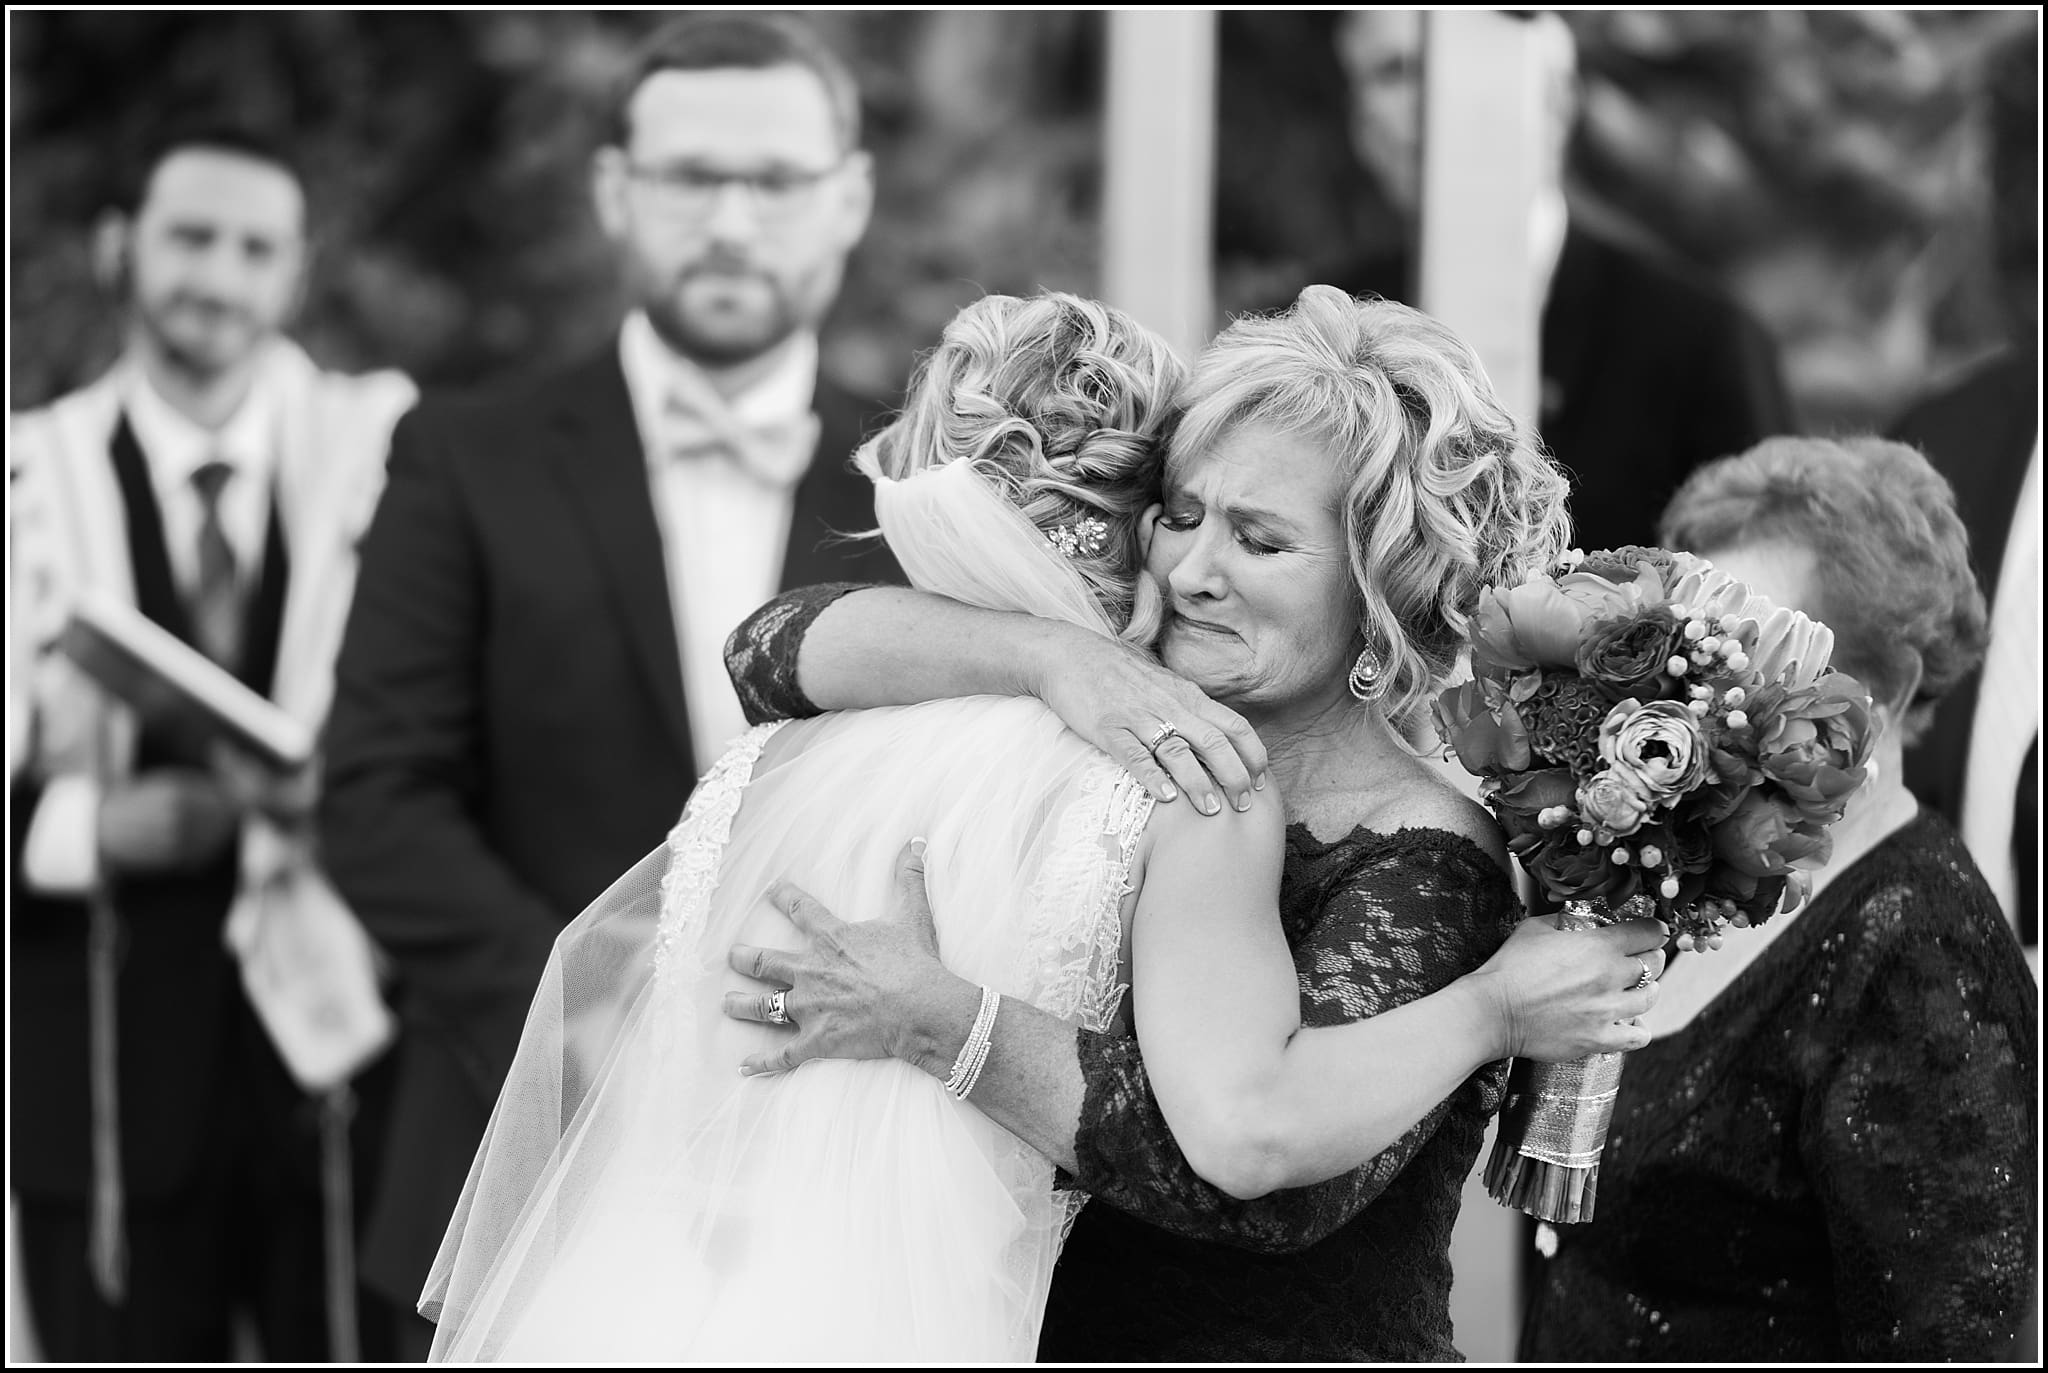  favorite wedding images 2016, wedding photos from 2016, our favorite wedding photos, mom giving away daughter, emotional mother of the bride photo, spencers palm springs wedding